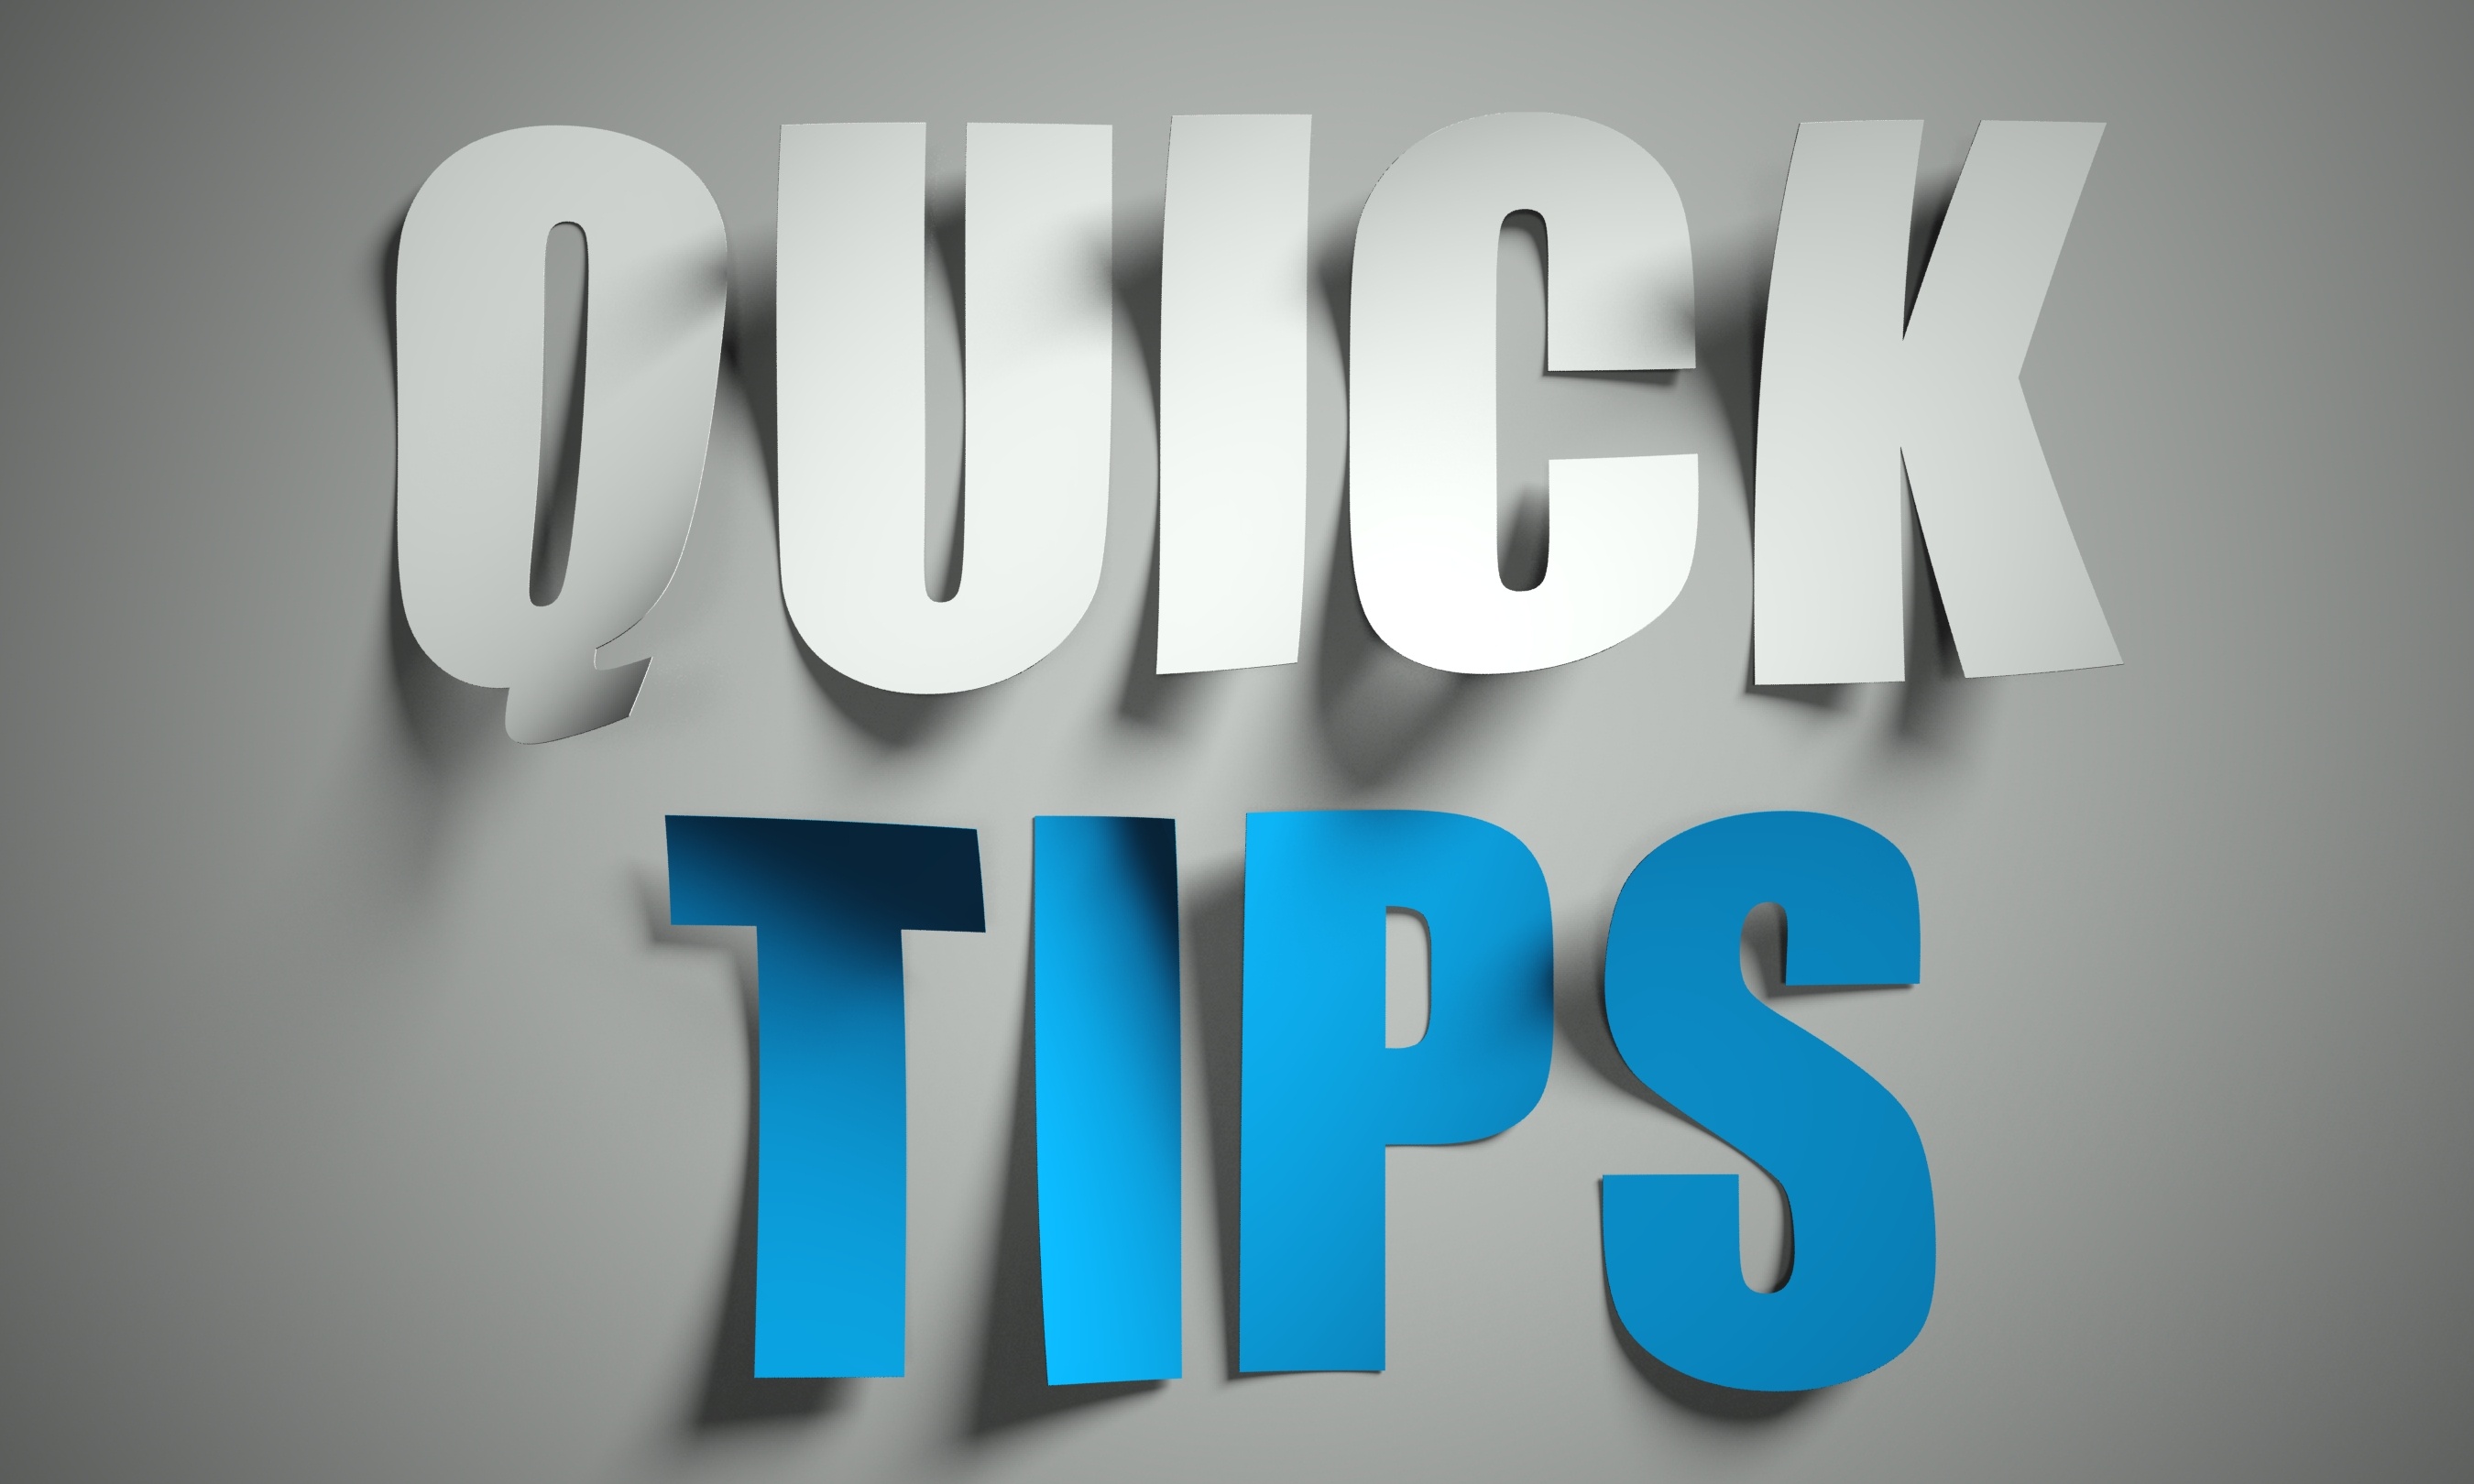 Quick tips cut from paper, background